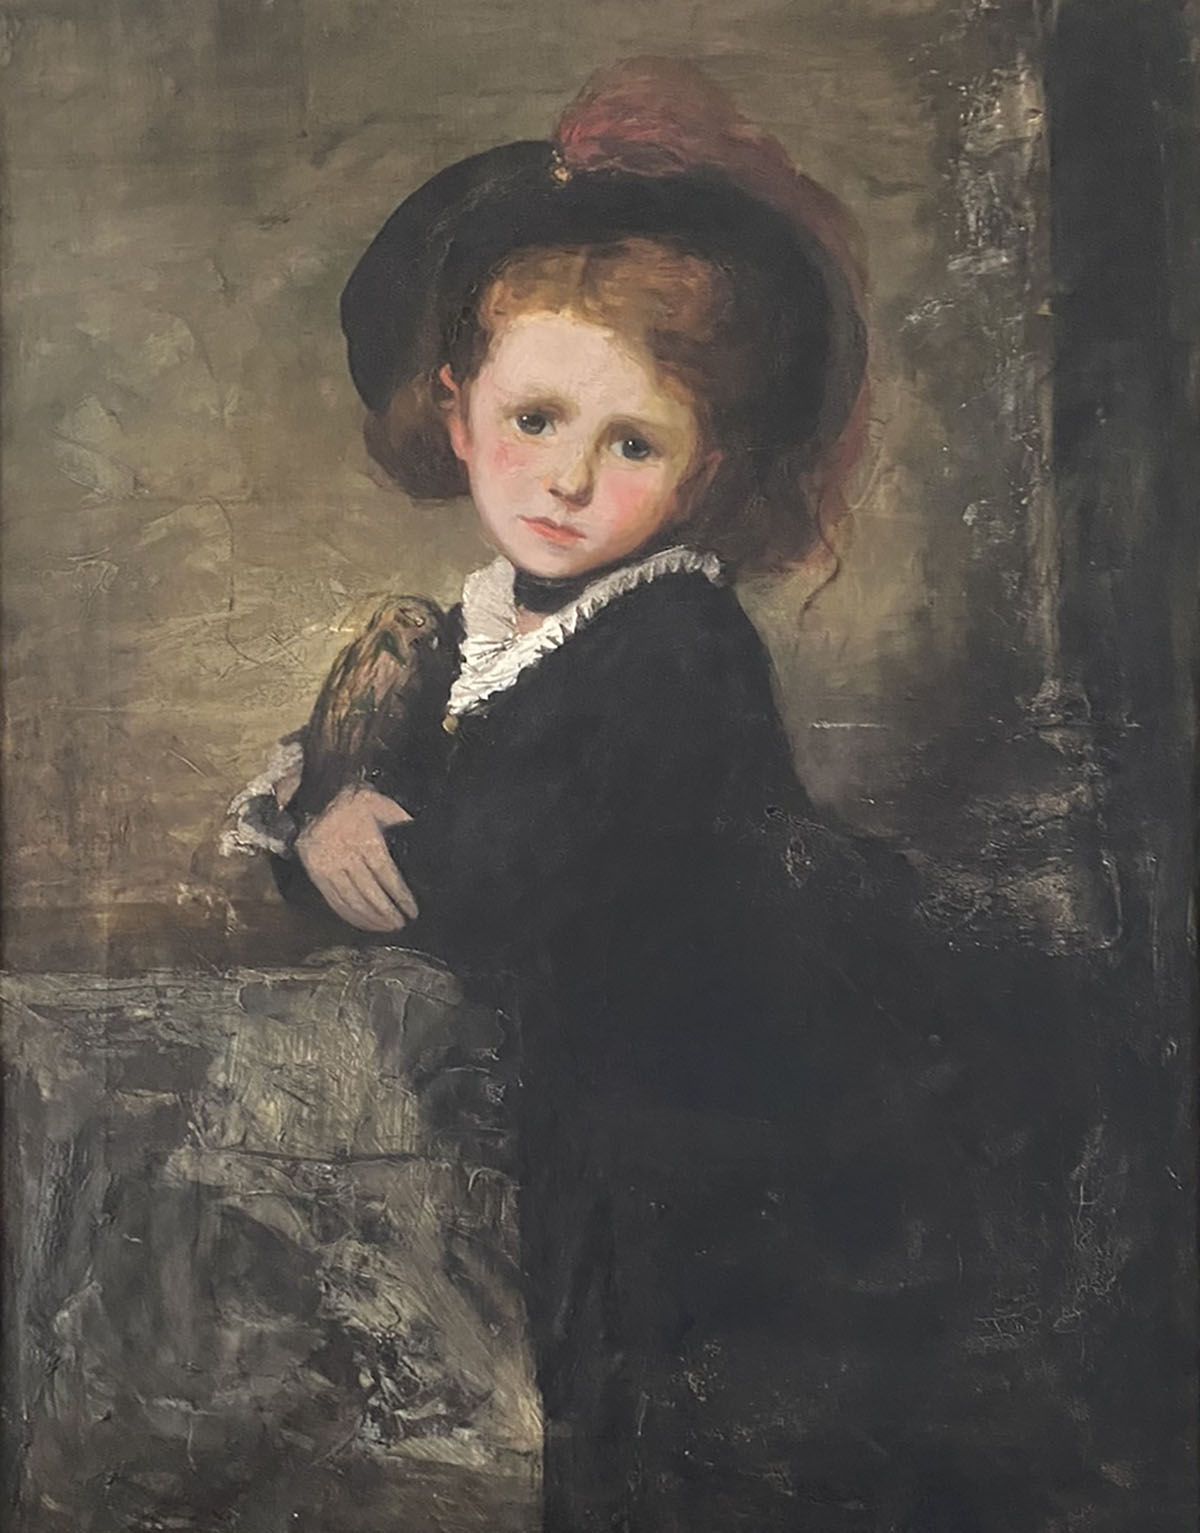 FINE PORTRAIT PAINTING OF A YOUNG